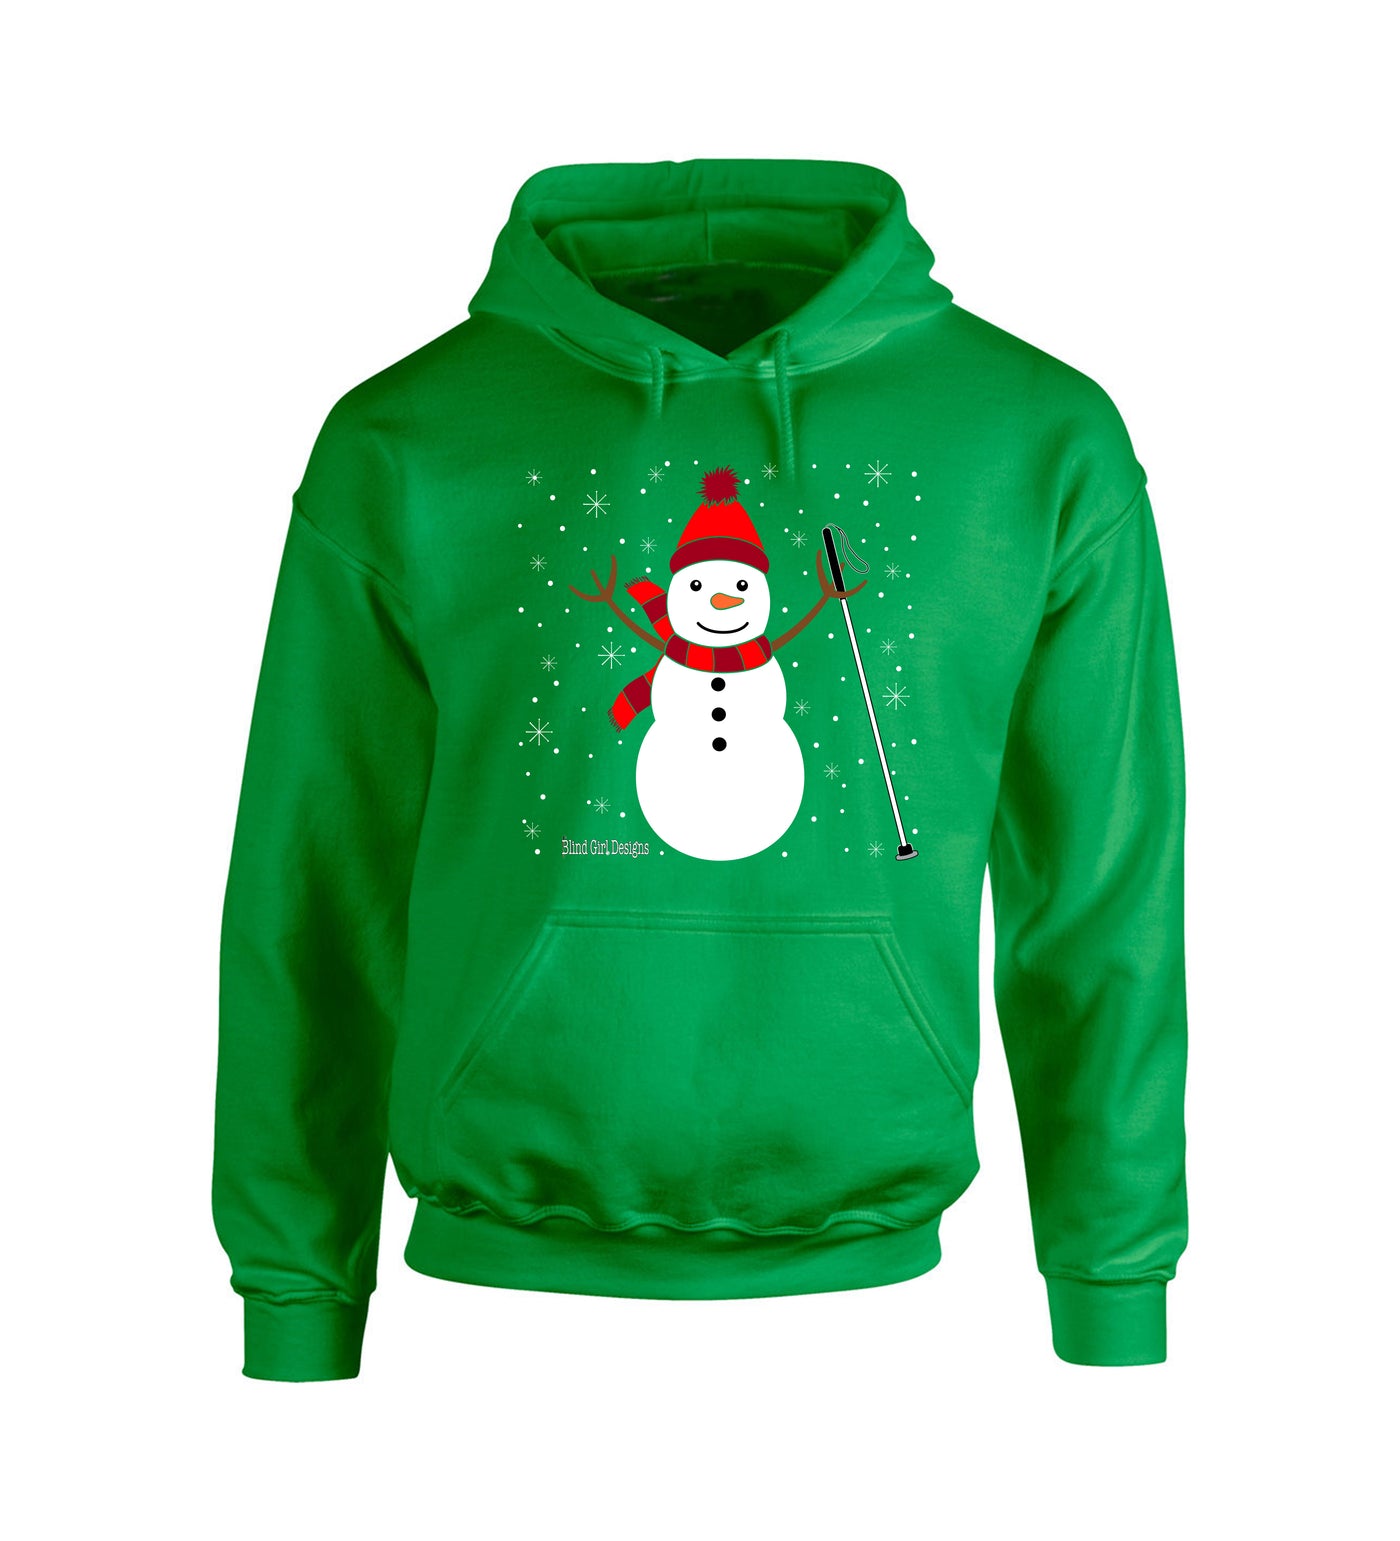 This green hoodie has a big pouch pocket. There is a large chest print of a white snowman in the center. The snowman has three black buttons on the chest, two black charcoal eyes, and a carrot for a nose. There is a red scarf around his neck and a fluffy red cap with a big pom-pom on the top. The snowman has brown branches for arms and in his right branch arm is a long white cane with a metal tip. The festive background is swirls of little tiny snowflakes in white.